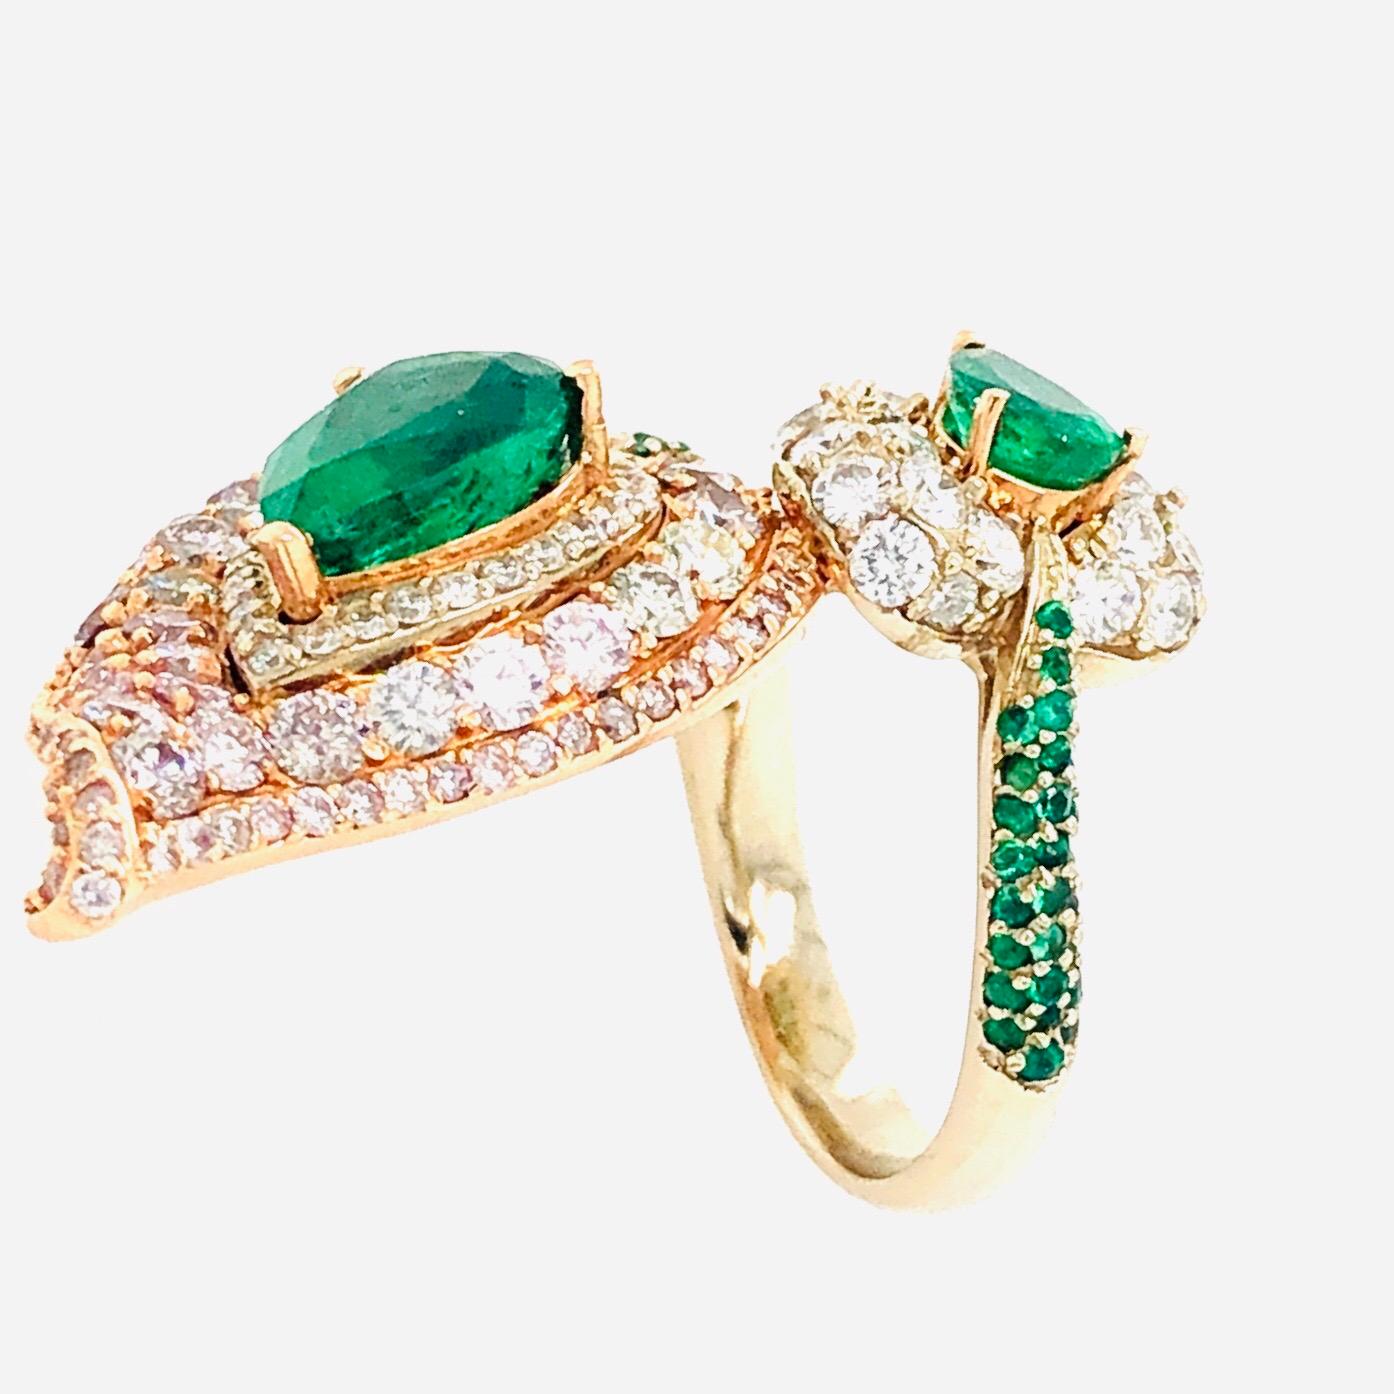 7.06 Carat Pink Diamonds and Emerald Ring 18 Karat Gold In Excellent Condition For Sale In Miami, FL